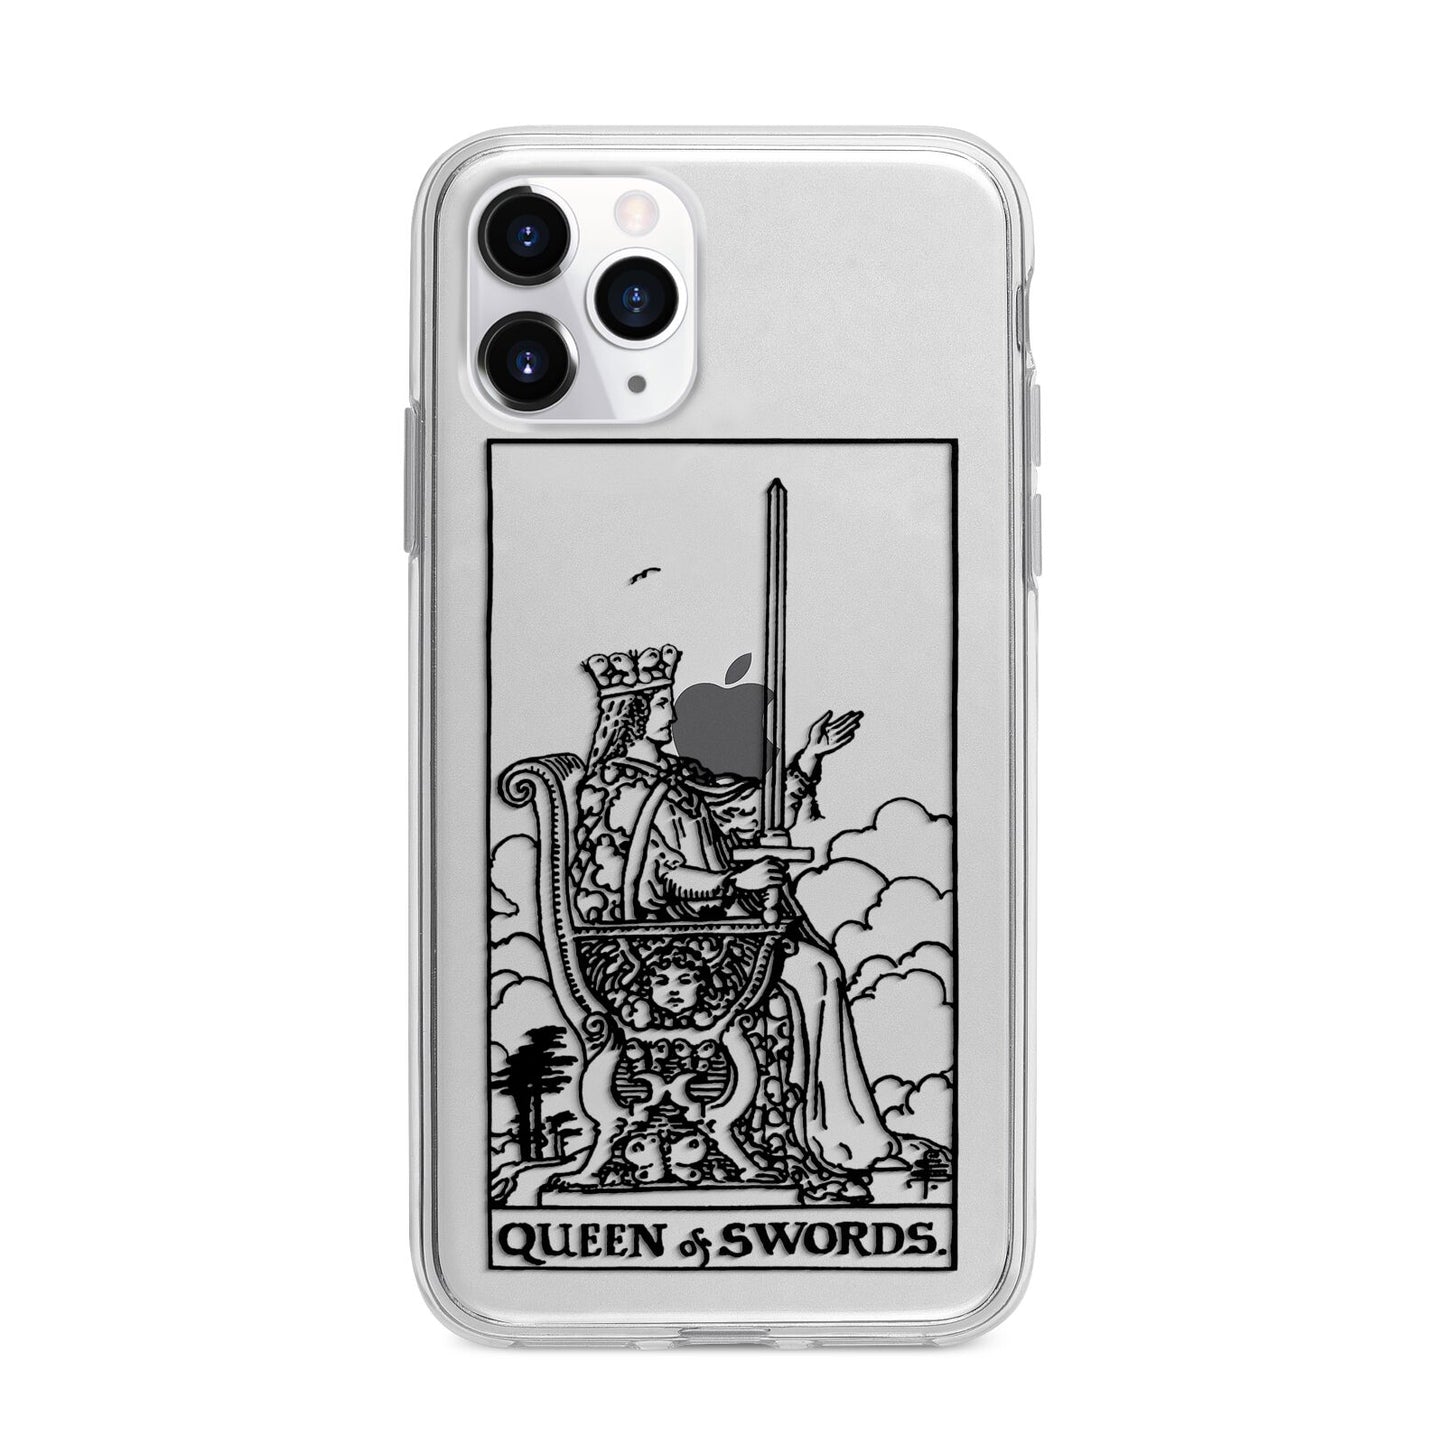 Queen of Swords Monochrome Apple iPhone 11 Pro in Silver with Bumper Case